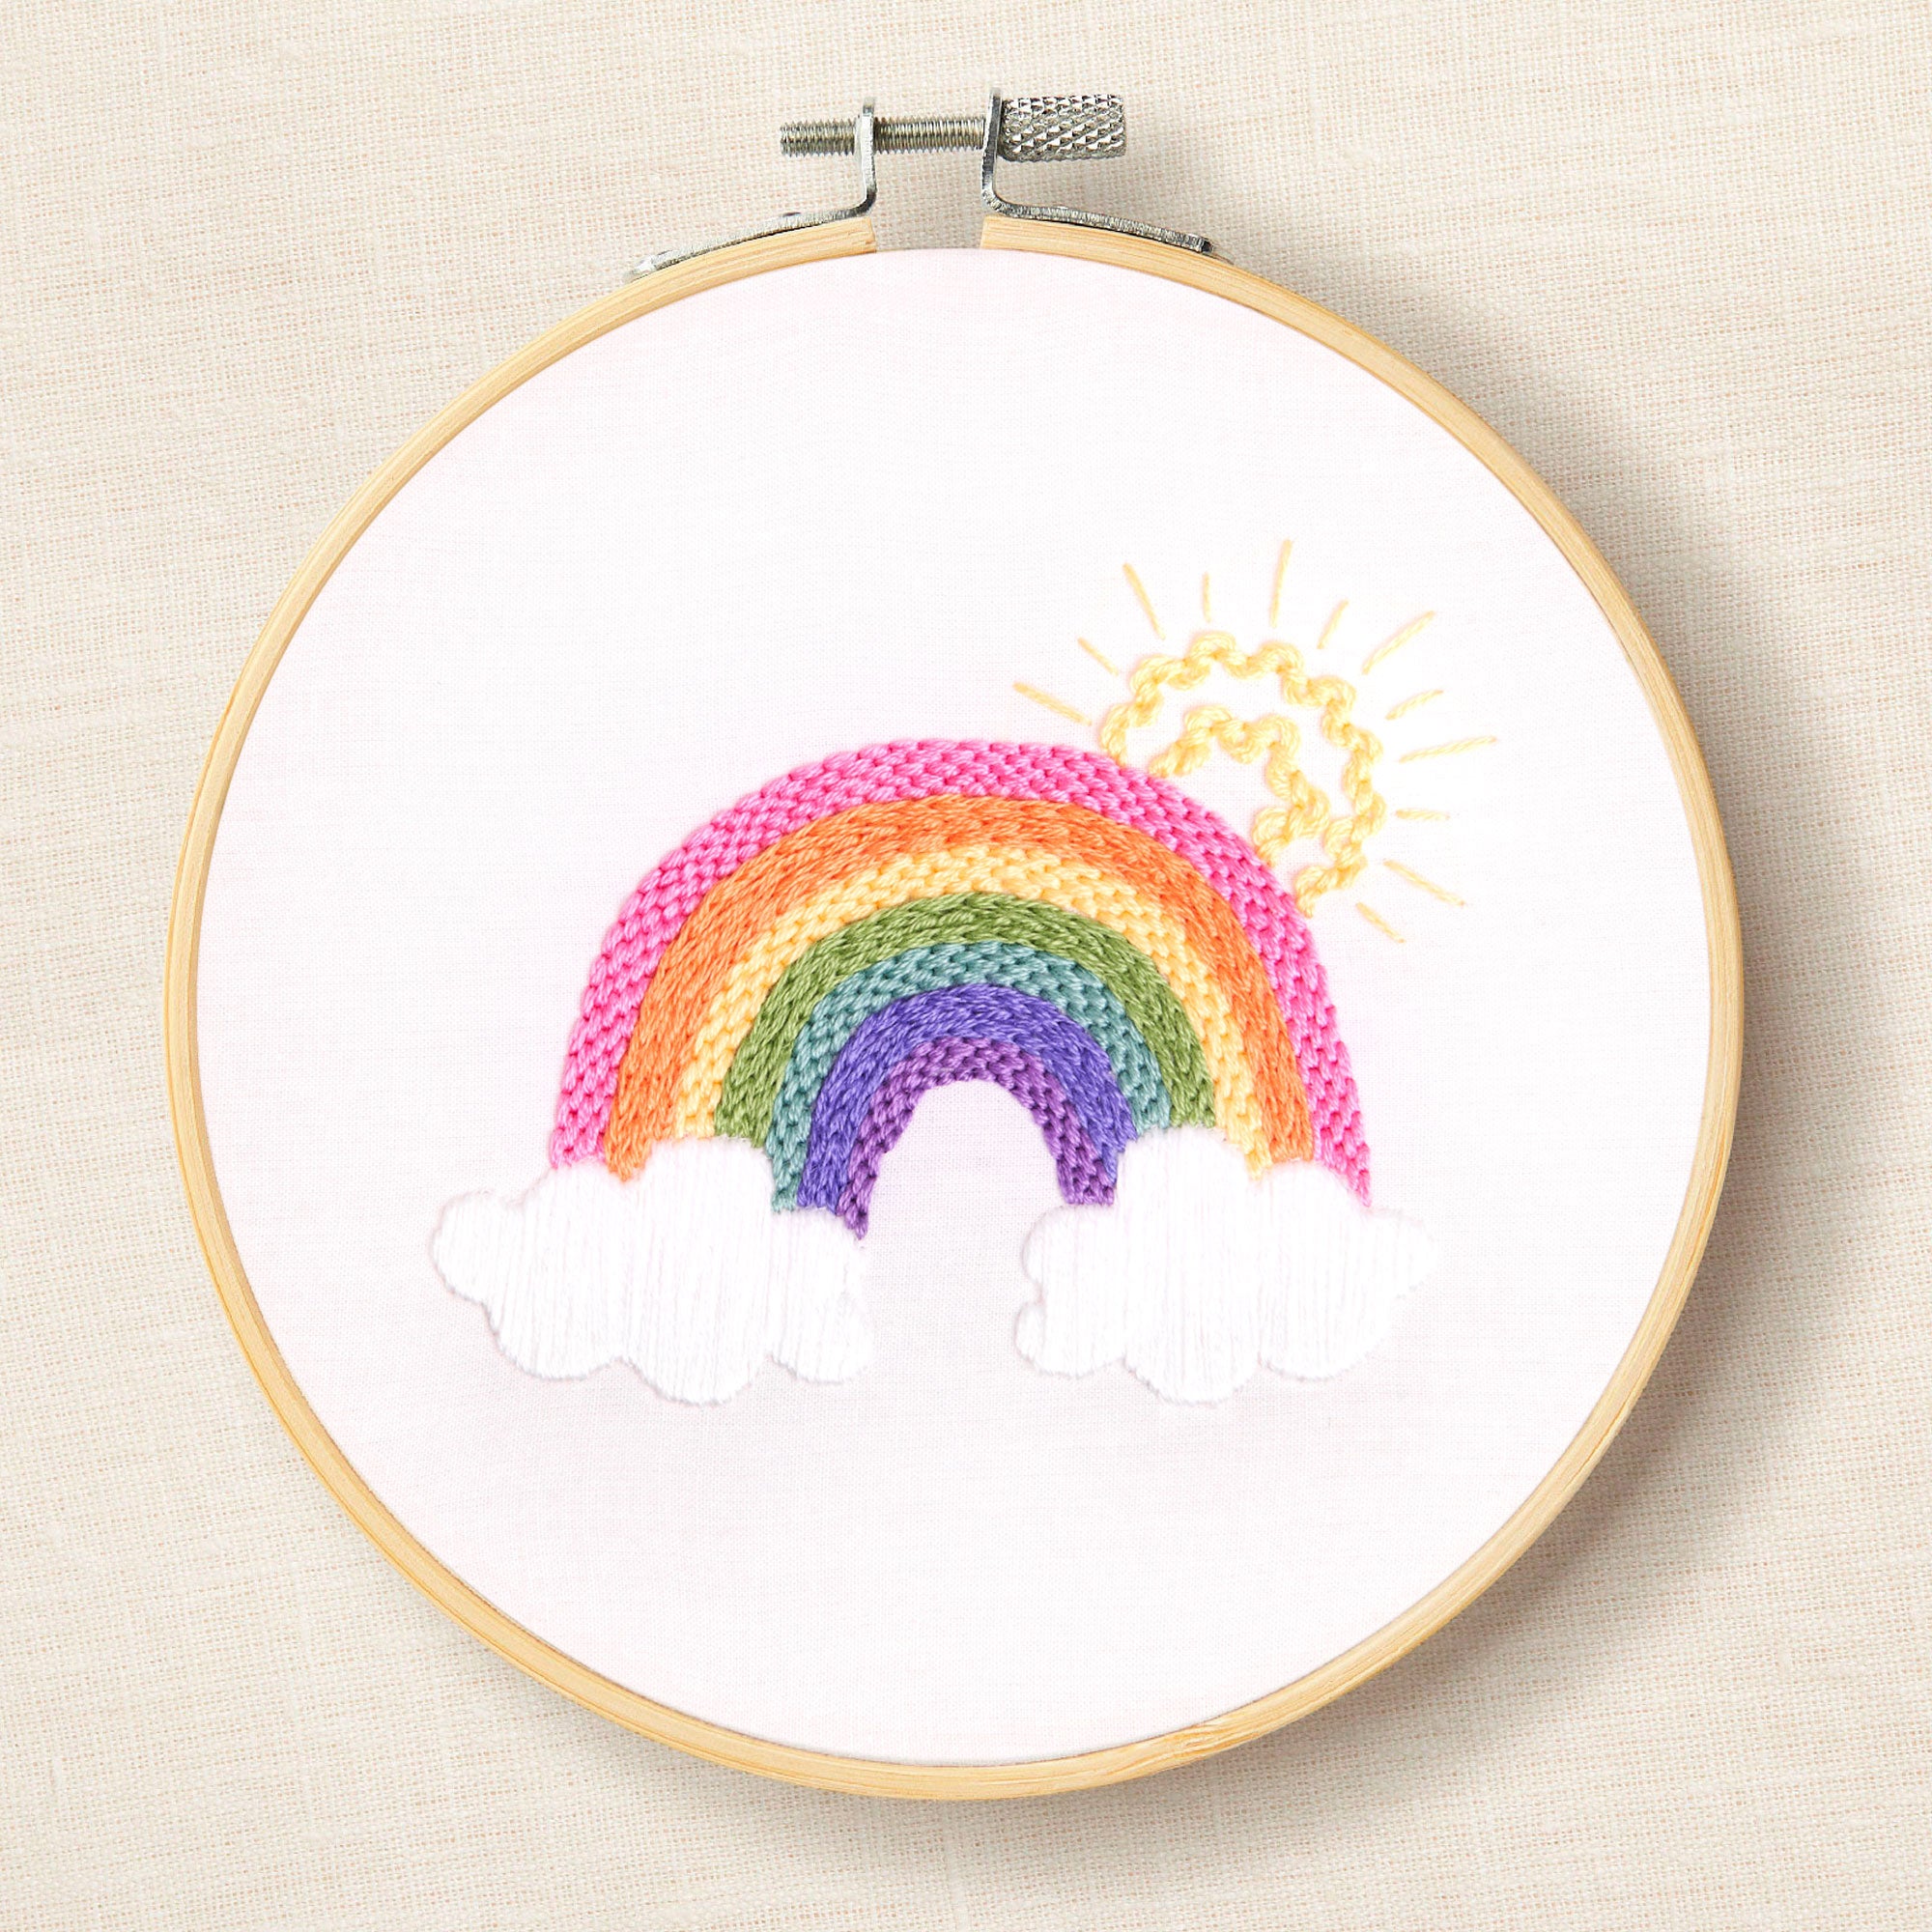 DMC Over the Ranbow by Jenni Davis (Embroidery Kit)